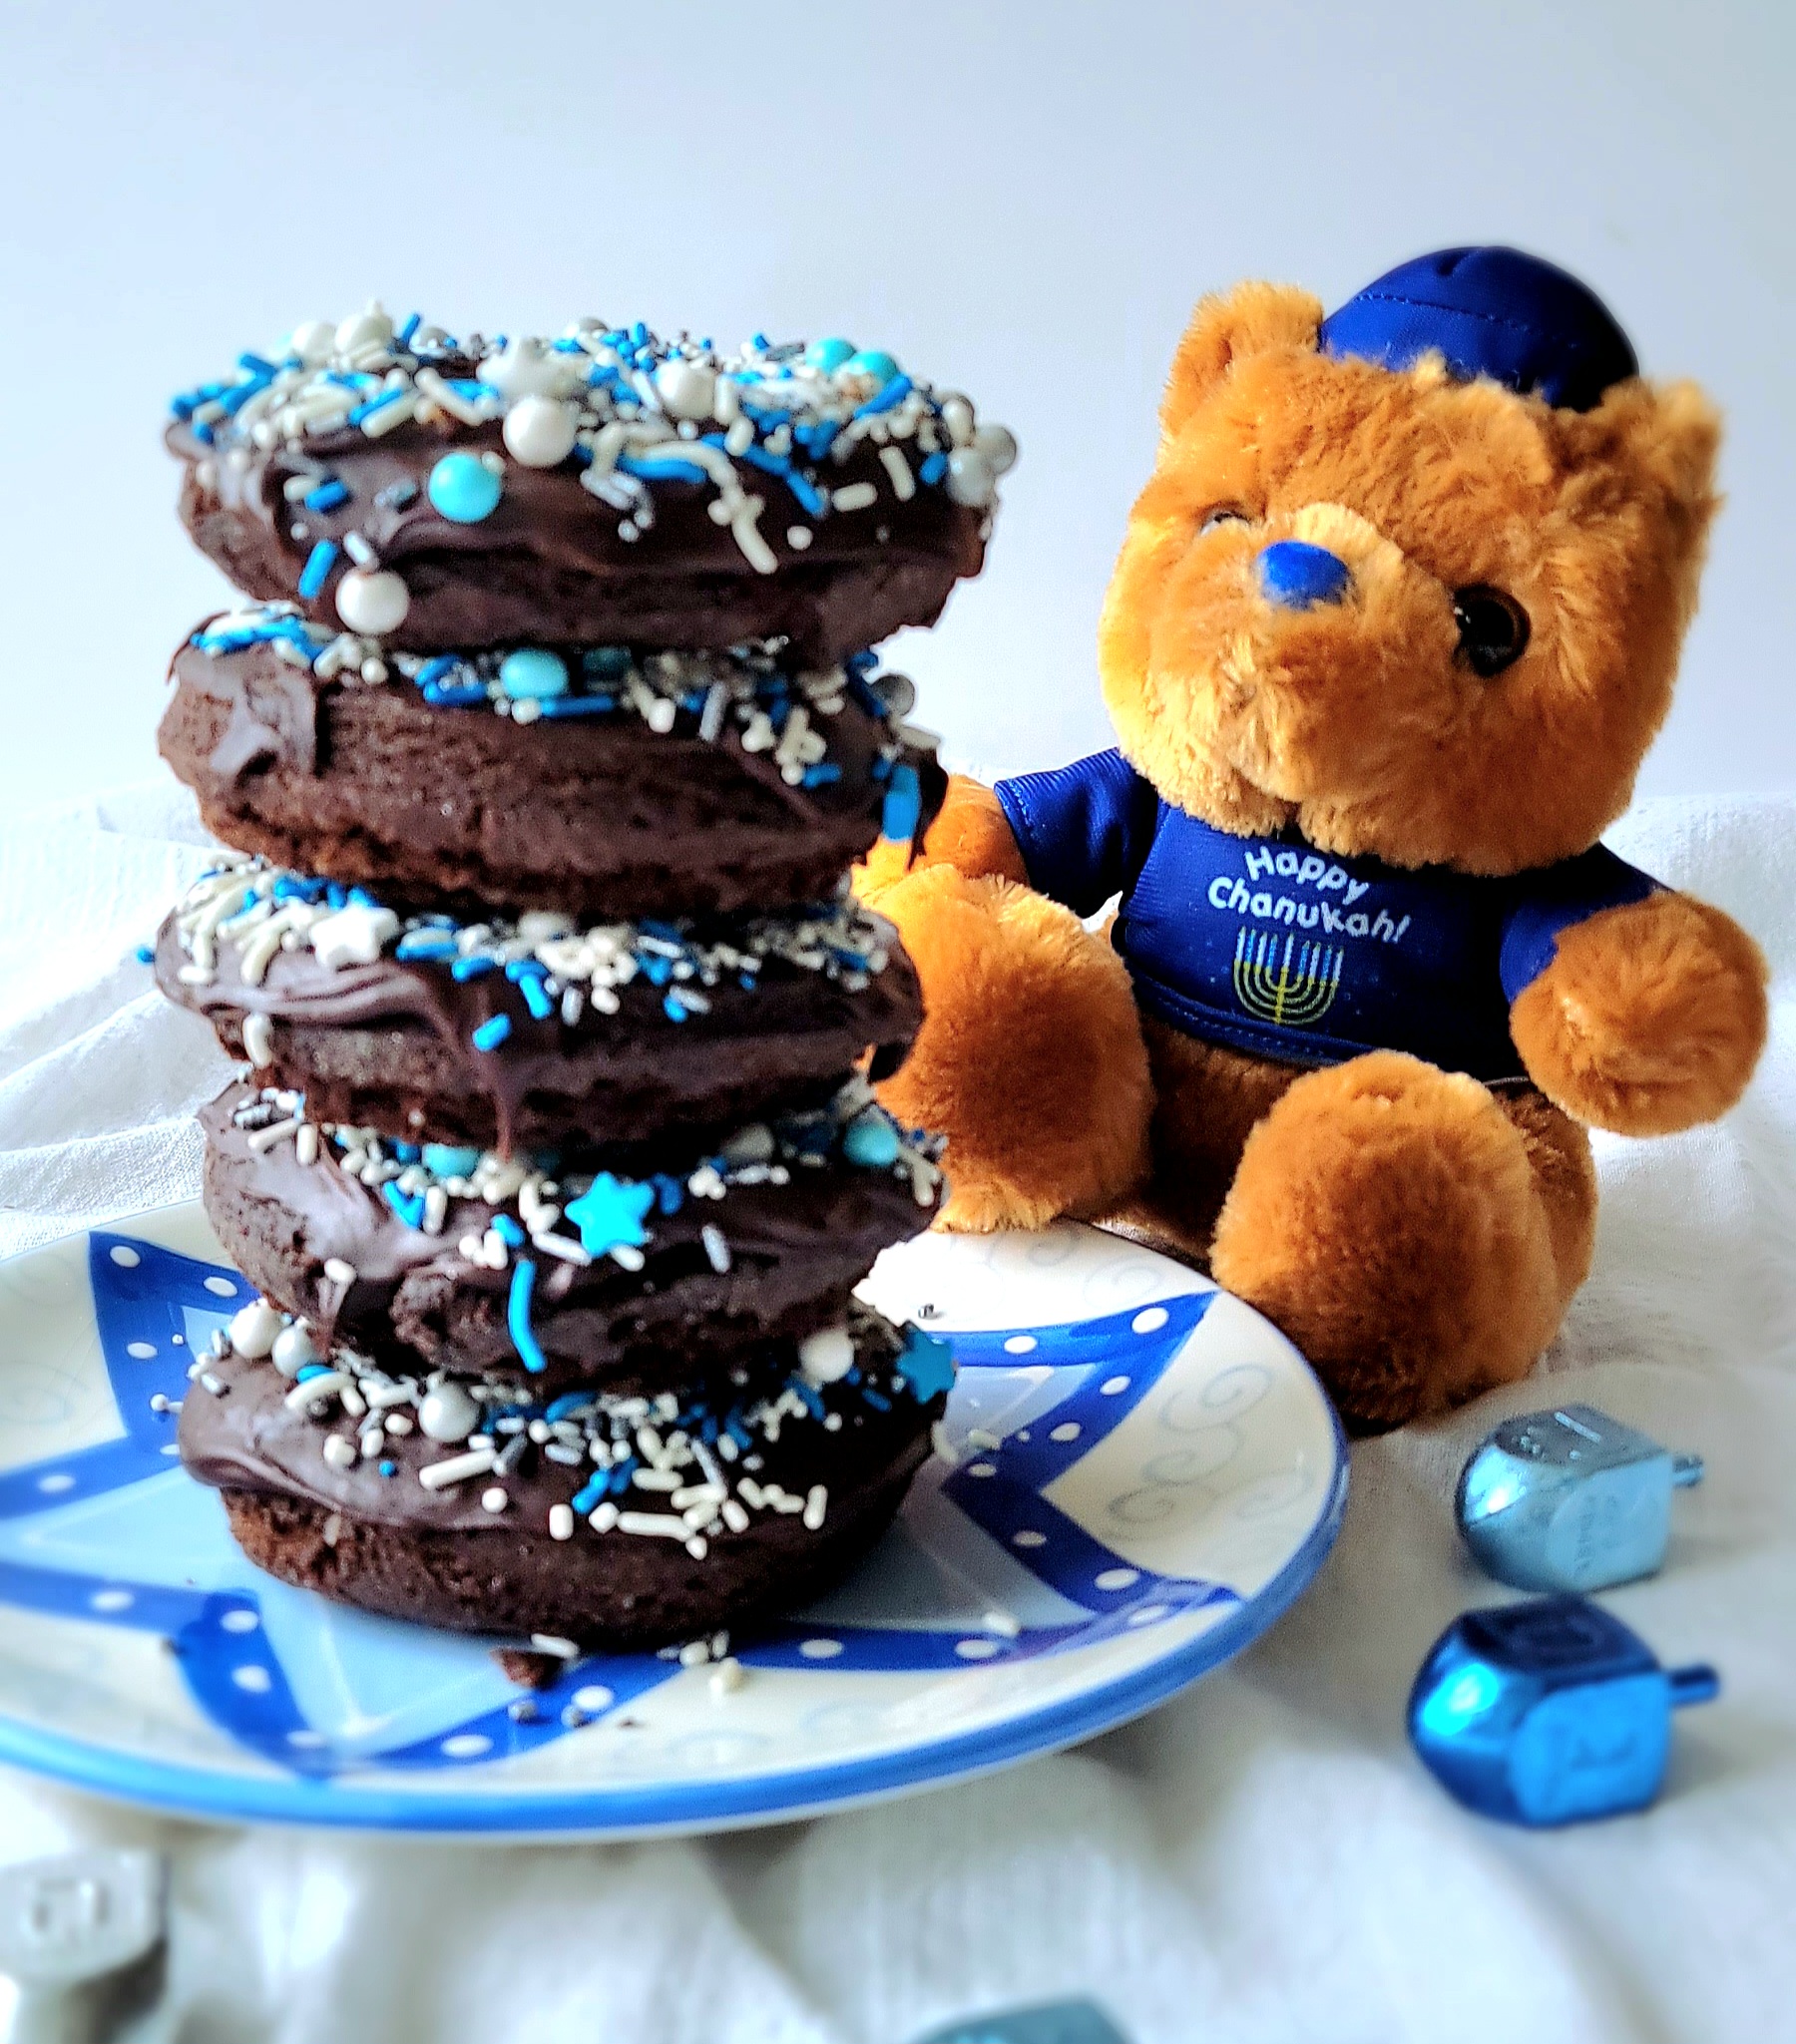 Chanukah Bear says "Give me Double Chocolate Gluten Free Donuts"!!!!